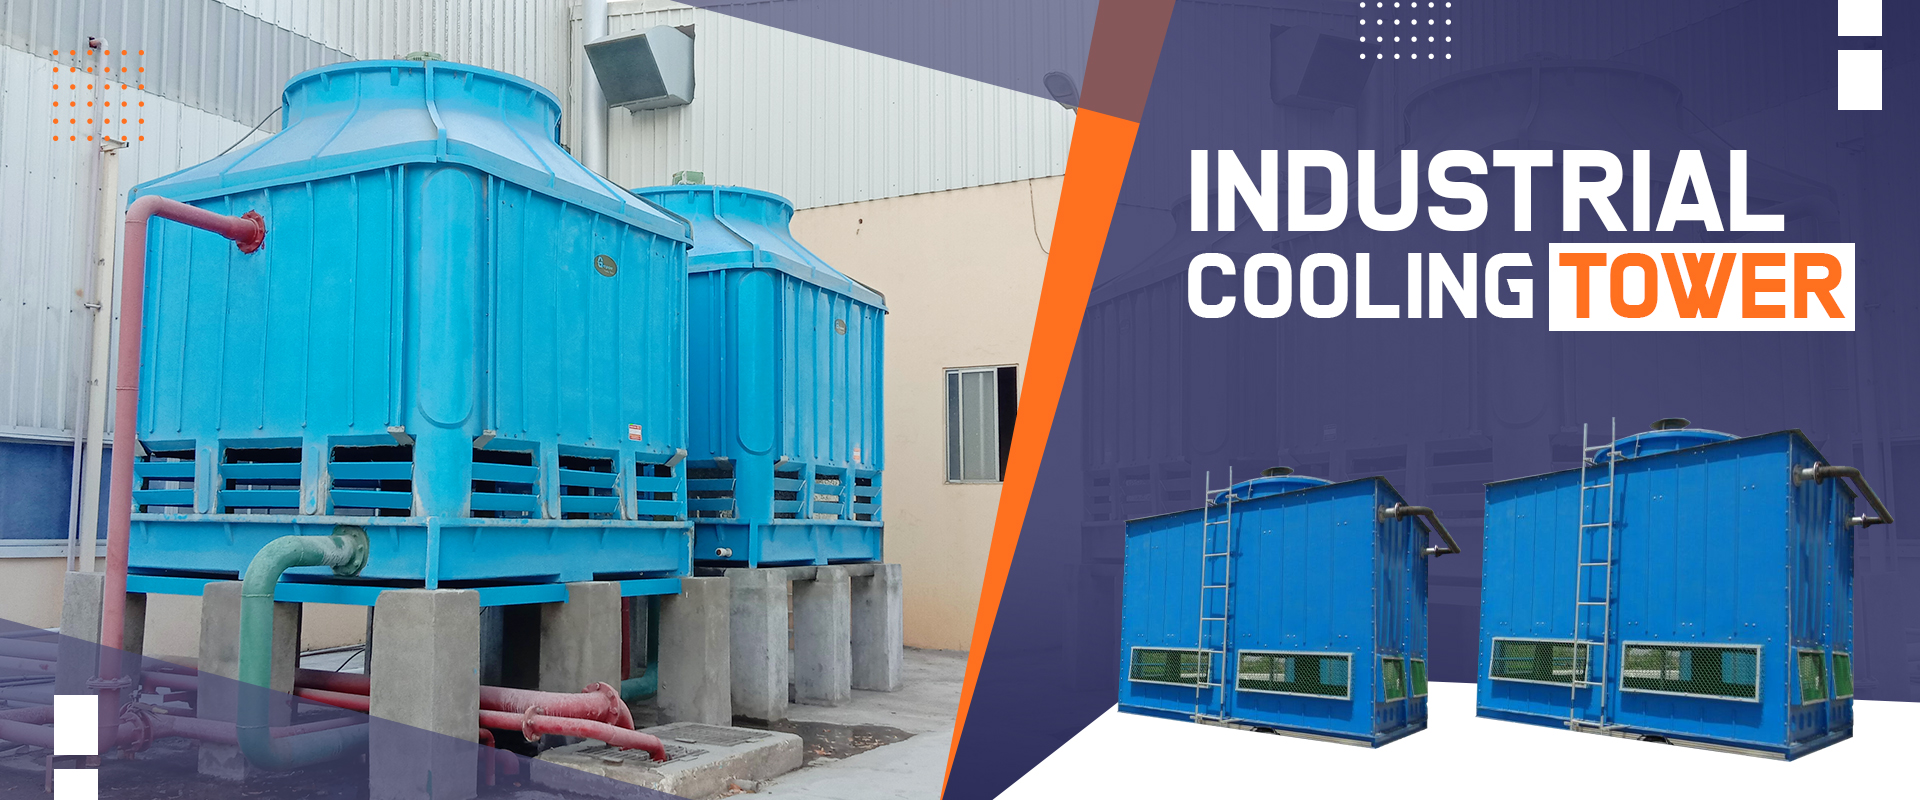 Industrial Cooling Tower2